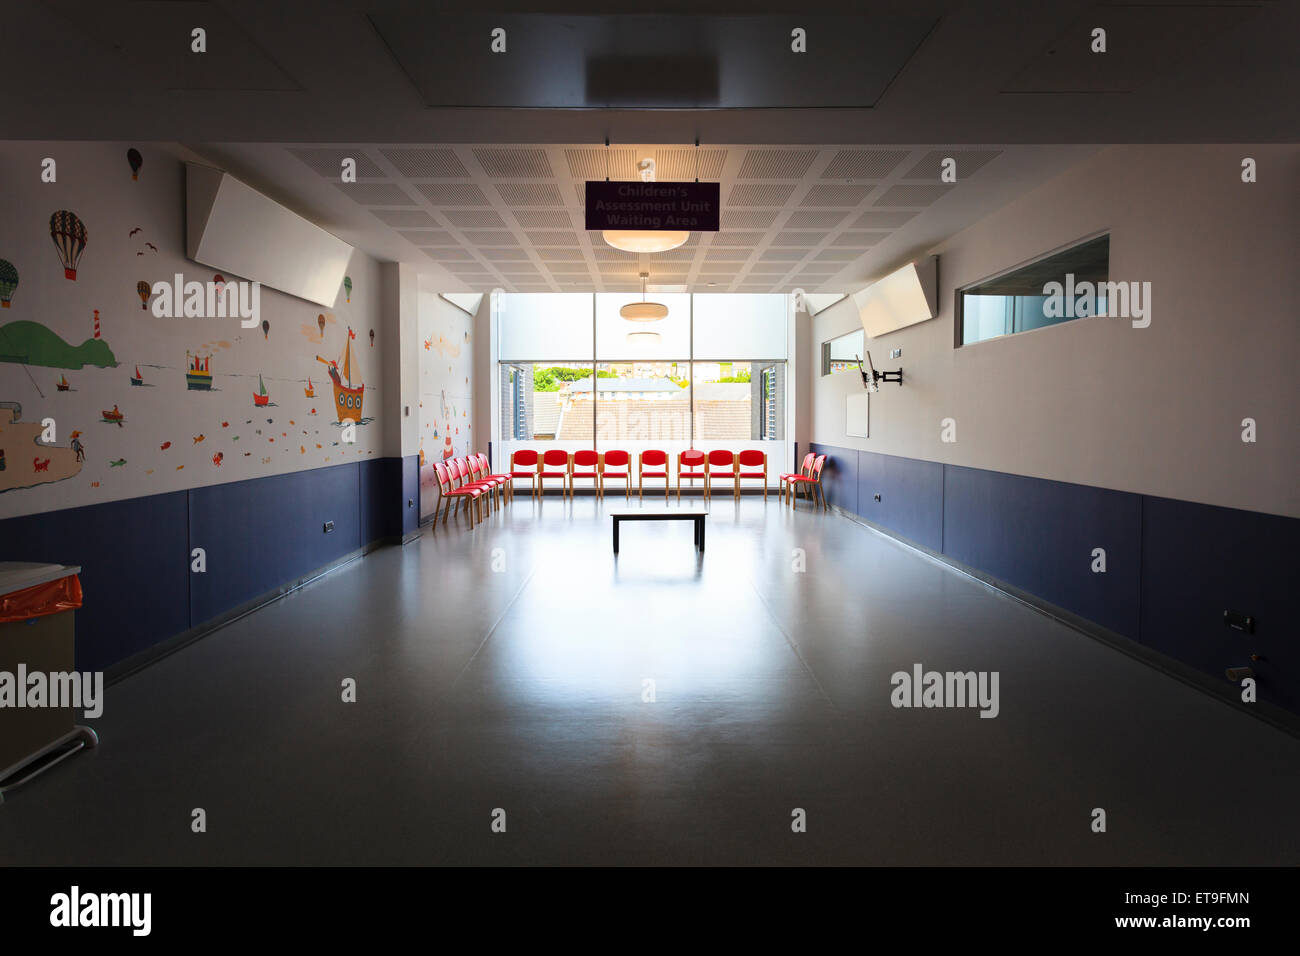 Unoccupied hospital childrens waiting without people and few chairs Stock Photo